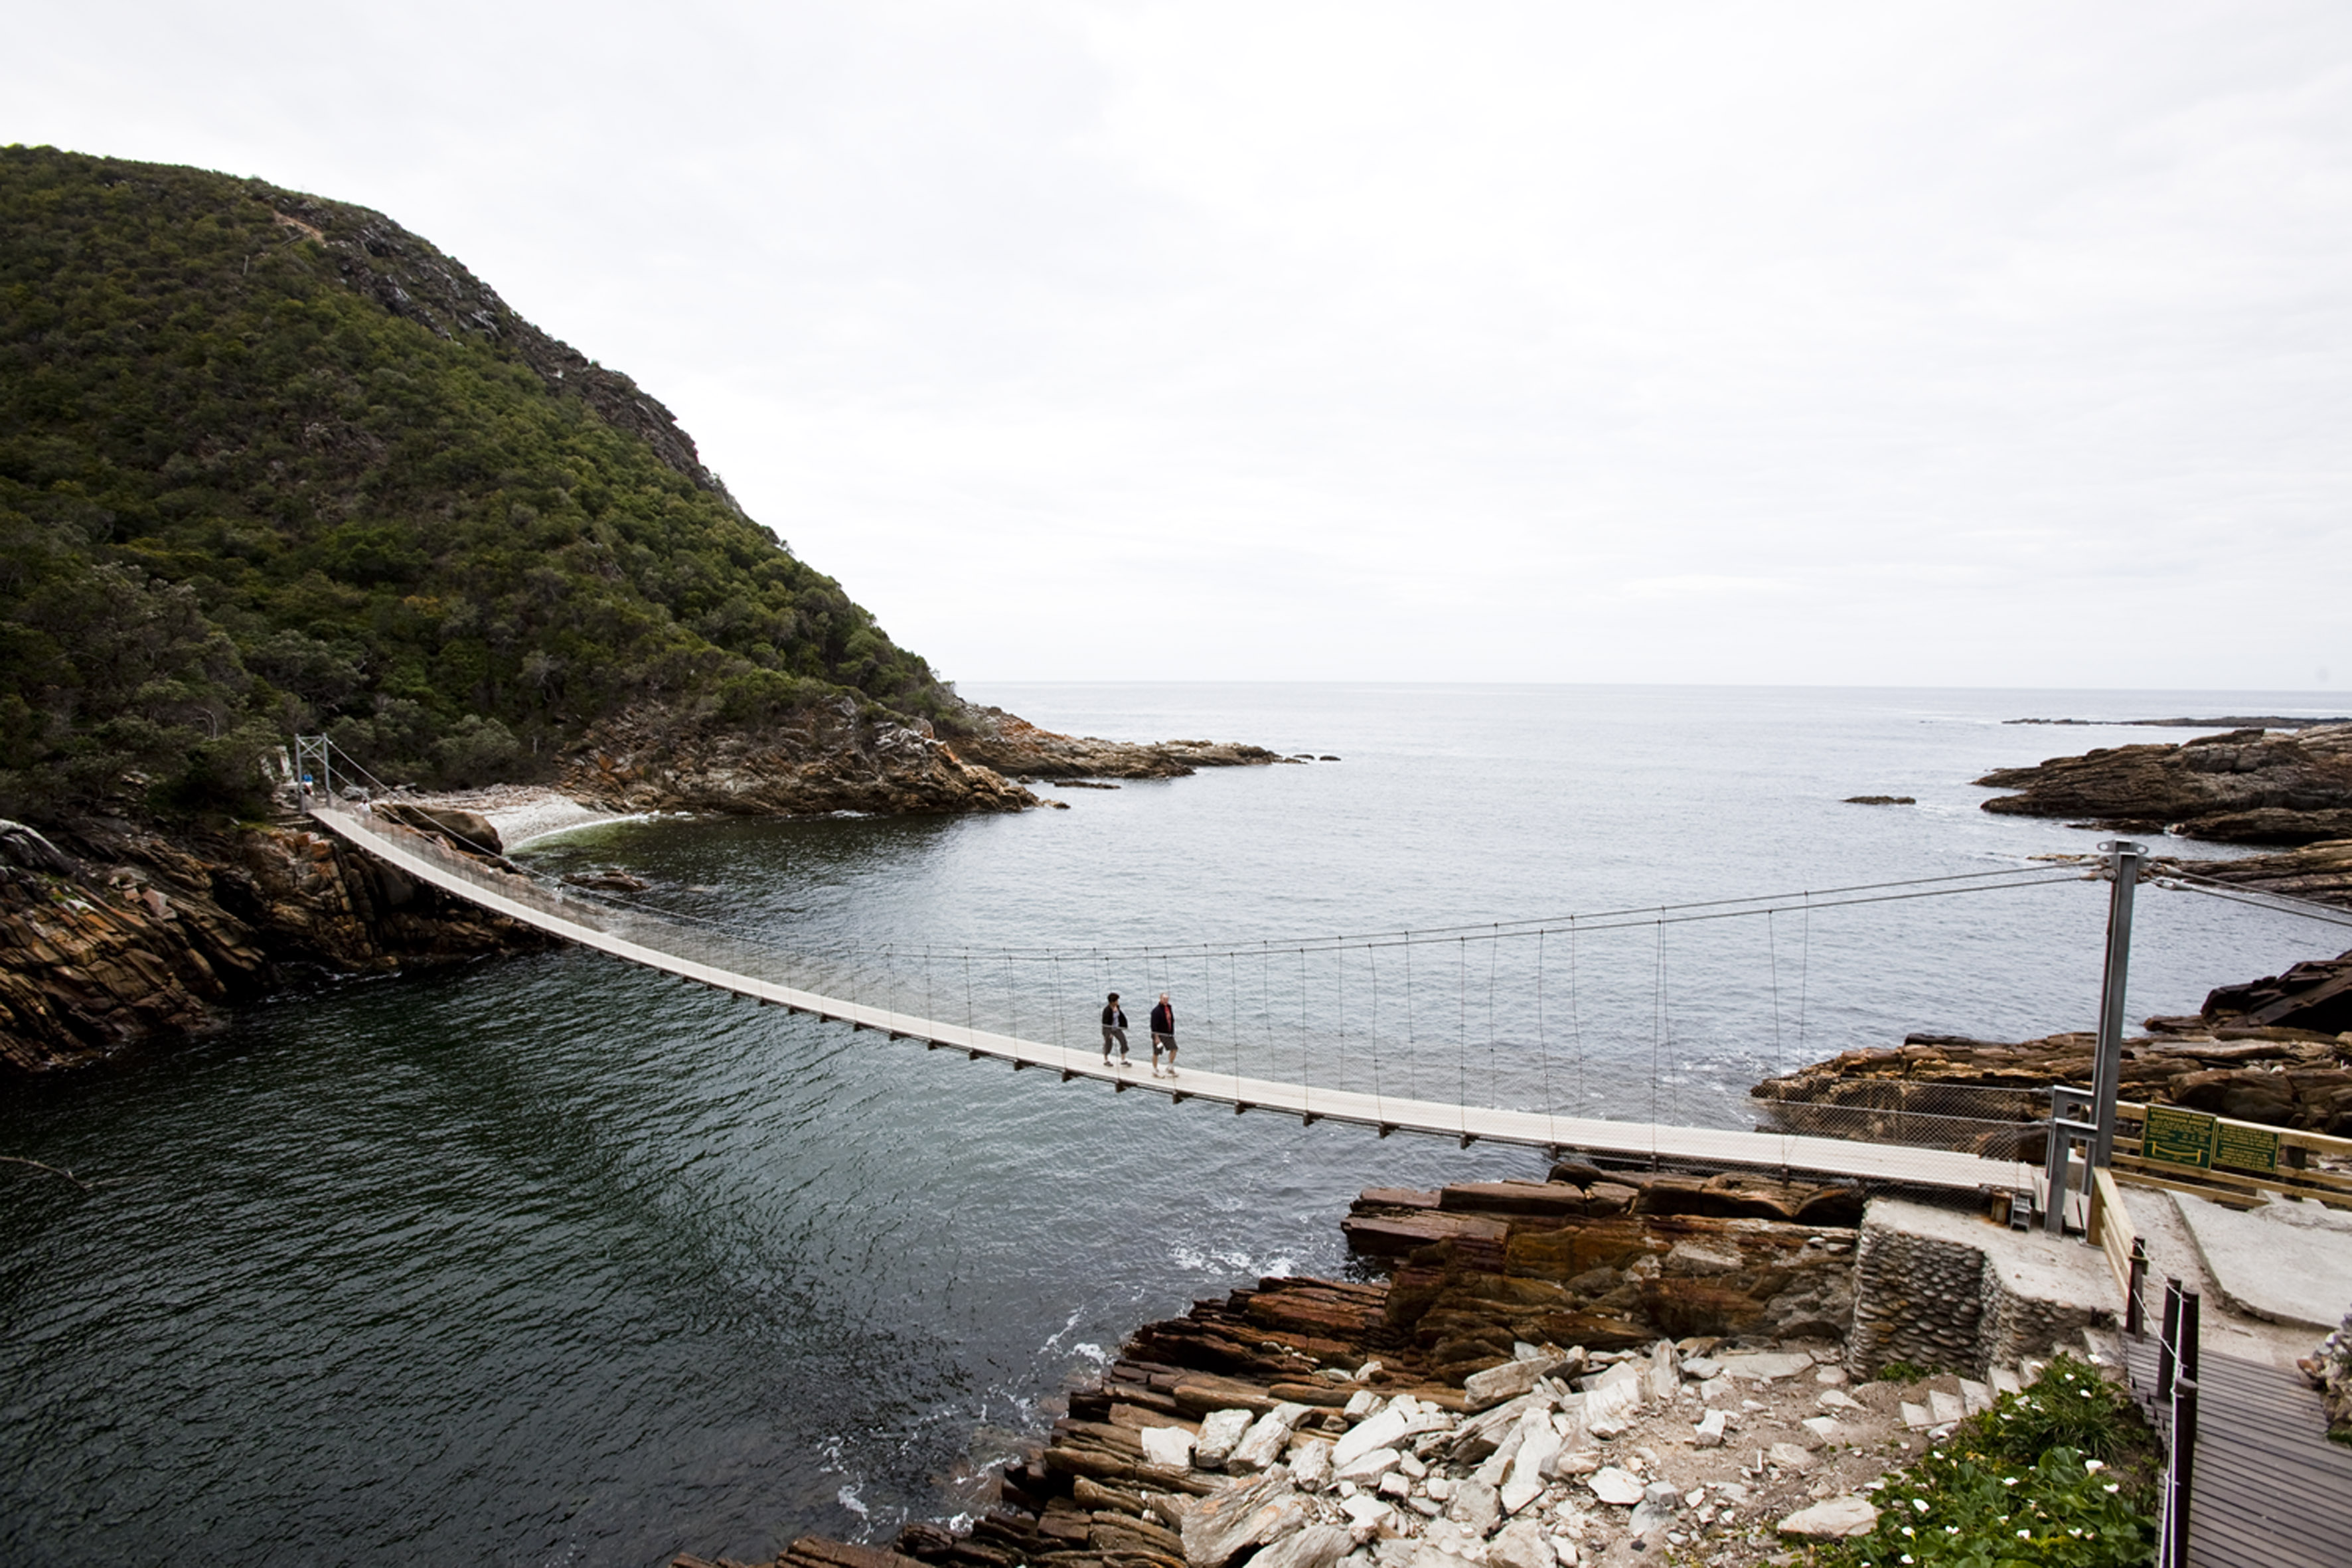 EASTERN CAPE, SOUTH AFRICA - SEPTEMBER 26: A couple walking on the suspension bridge over the Storms River on September 26, 2009 in Eastern Cape, South Africa. (Photo by Gallo Images / GO! / Dawie Verwey)